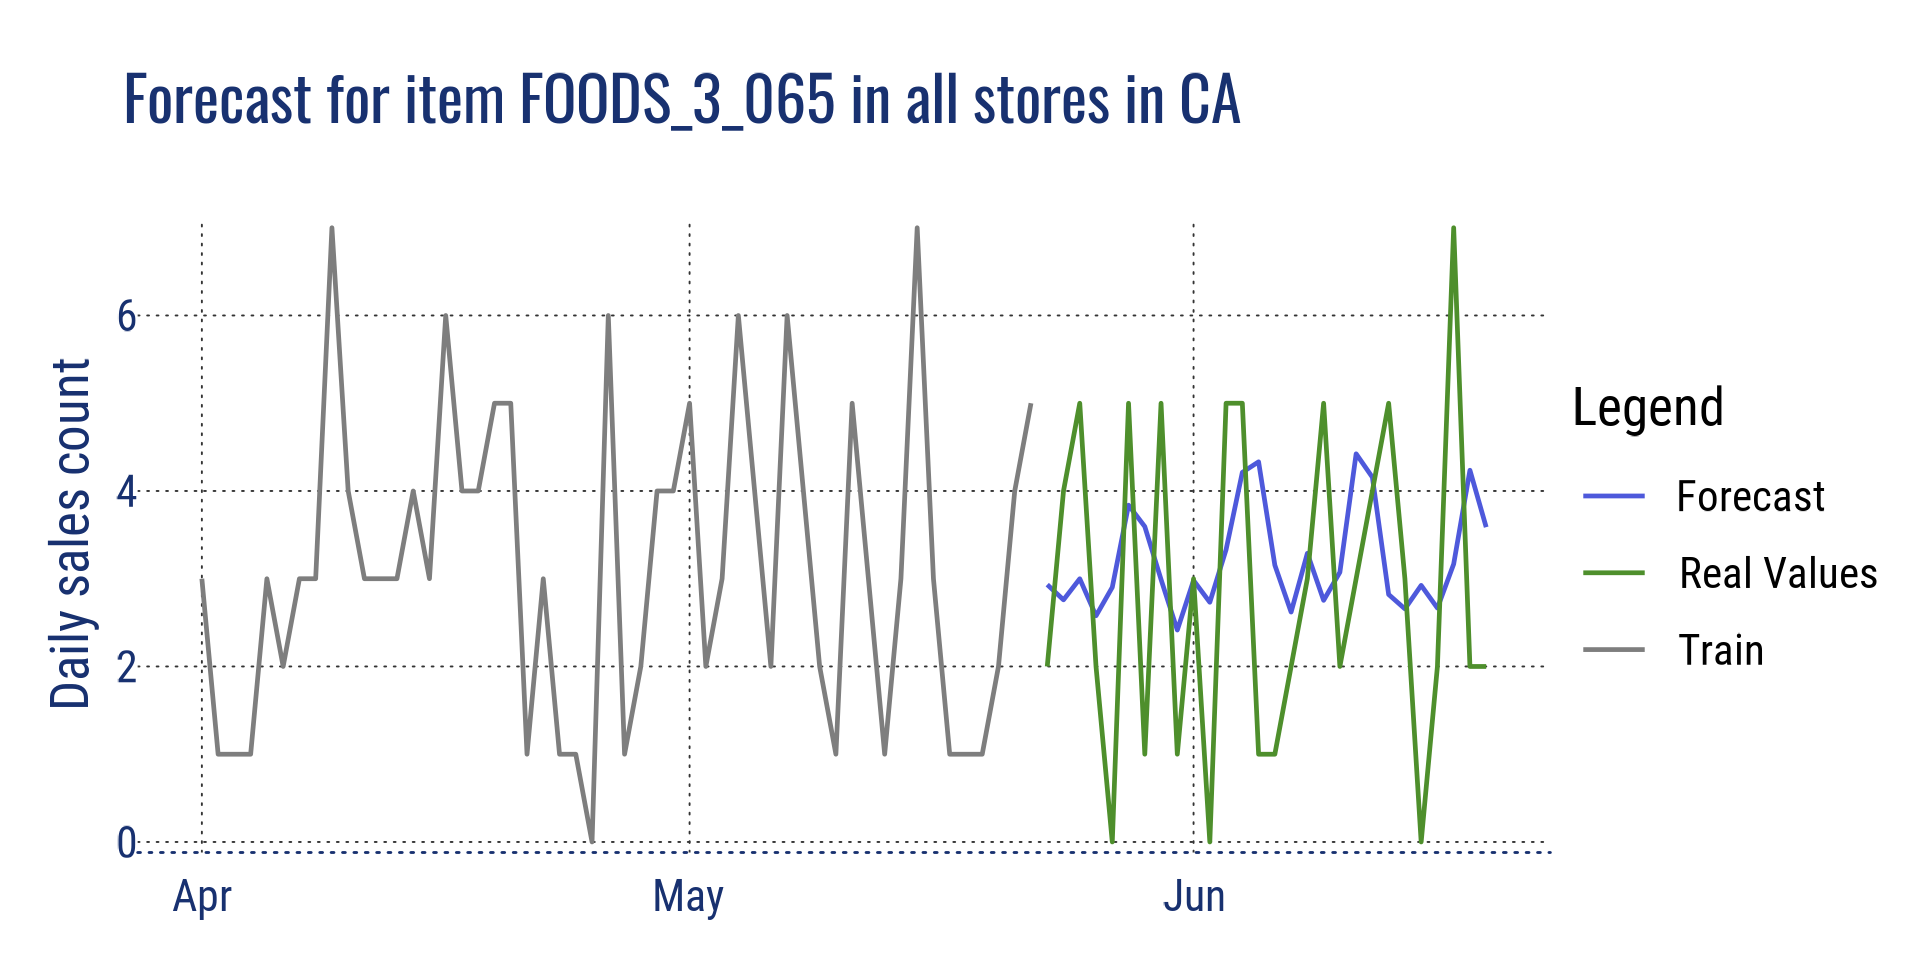 Forecast for item FOODS_3_065 in all stores in CA